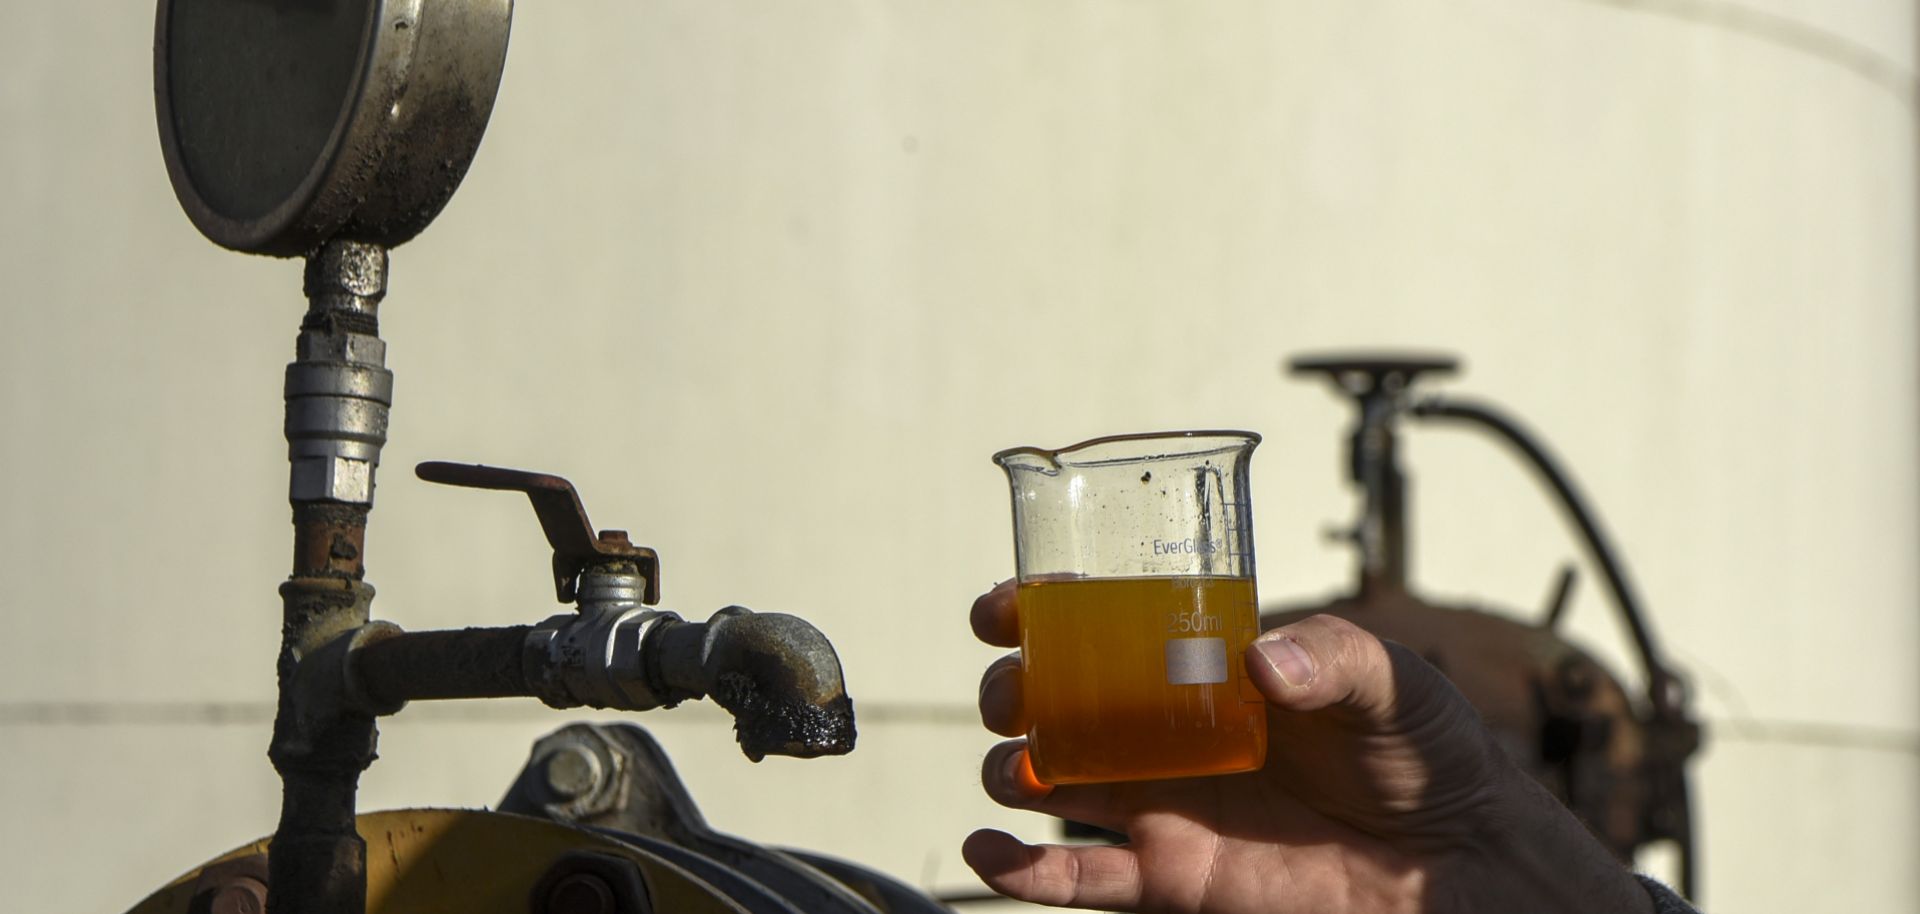 An engineer shows a sample of biodiesel at an industrial complex in General Lagos, Argentina on Sept. 13, 2017.